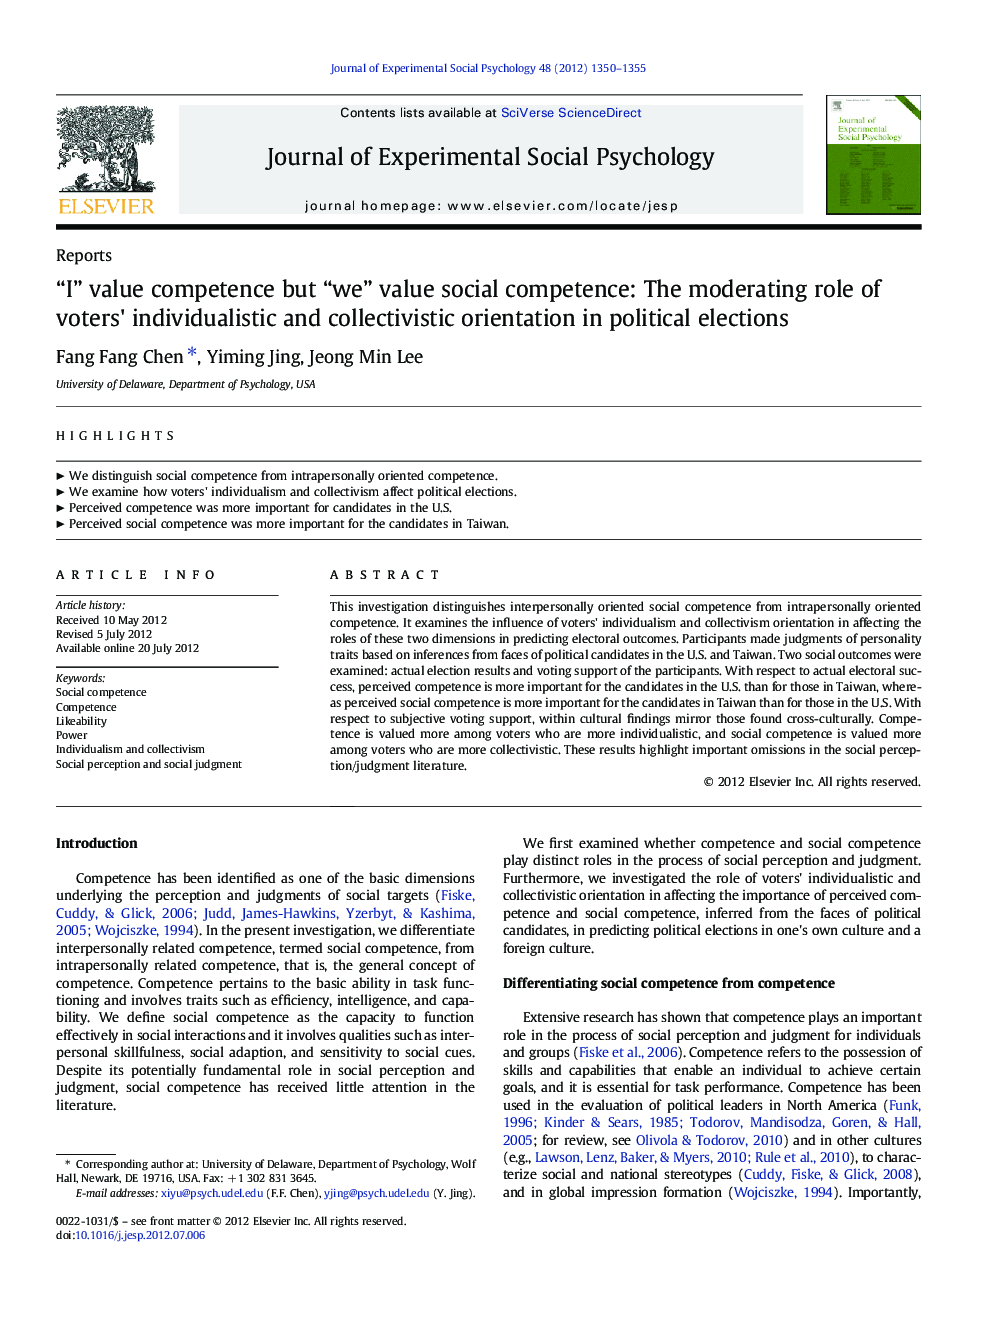 “I” value competence but “we” value social competence: The moderating role of voters' individualistic and collectivistic orientation in political elections